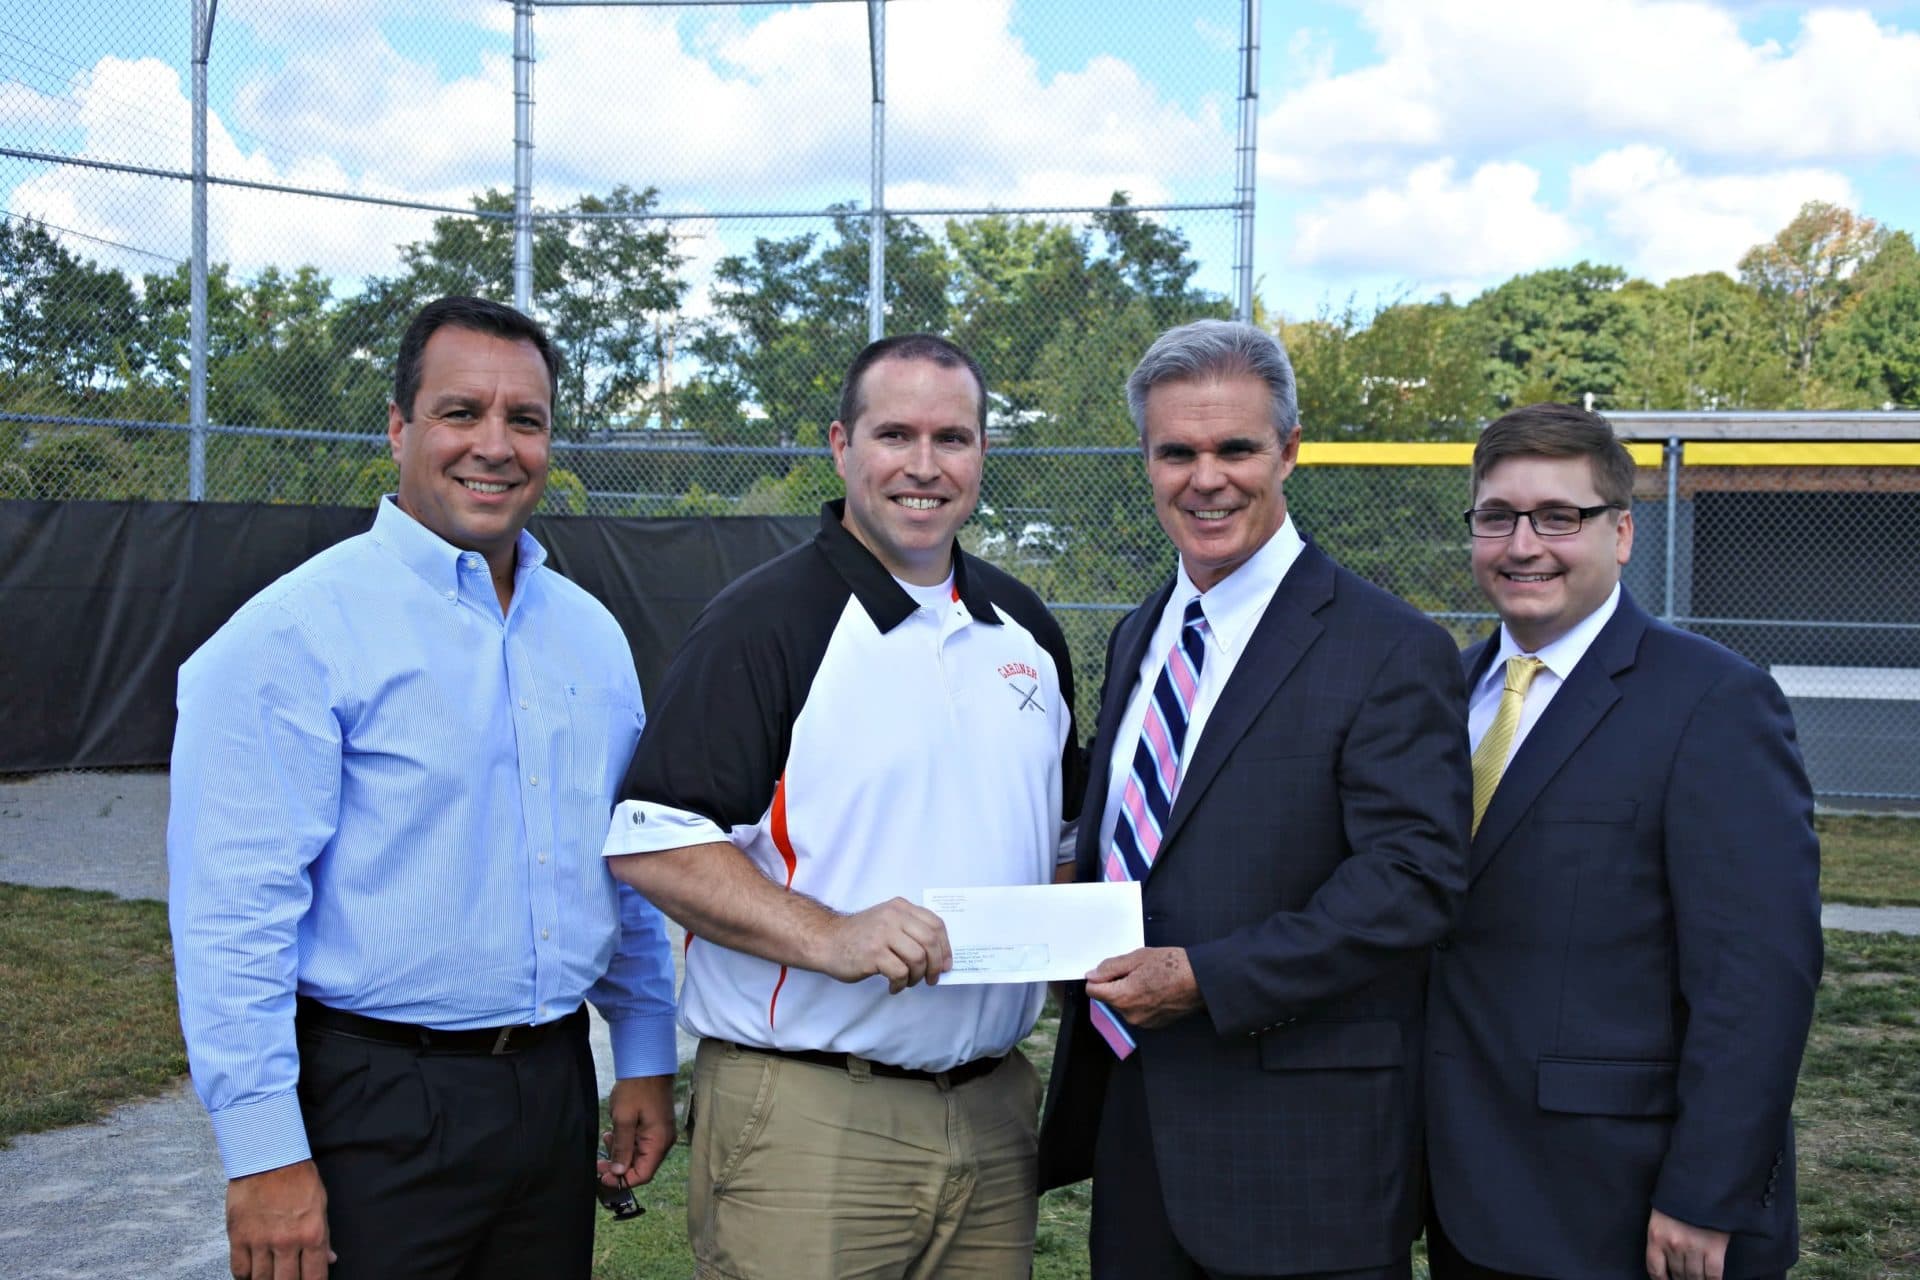 District Attorney Joseph D. Early Jr. presents a check from his county's drug forfeiture funds to Gardner Youth Baseball &amp; Softball League to help improve their field. The league’s president, Kevin Robillard, accepted the check and they were joined by former Gardner Mayor Mark Hawke and state Rep. Jonathan Zlotnik. (Photo published on Worcester County District Attorney's Office website in 2016)